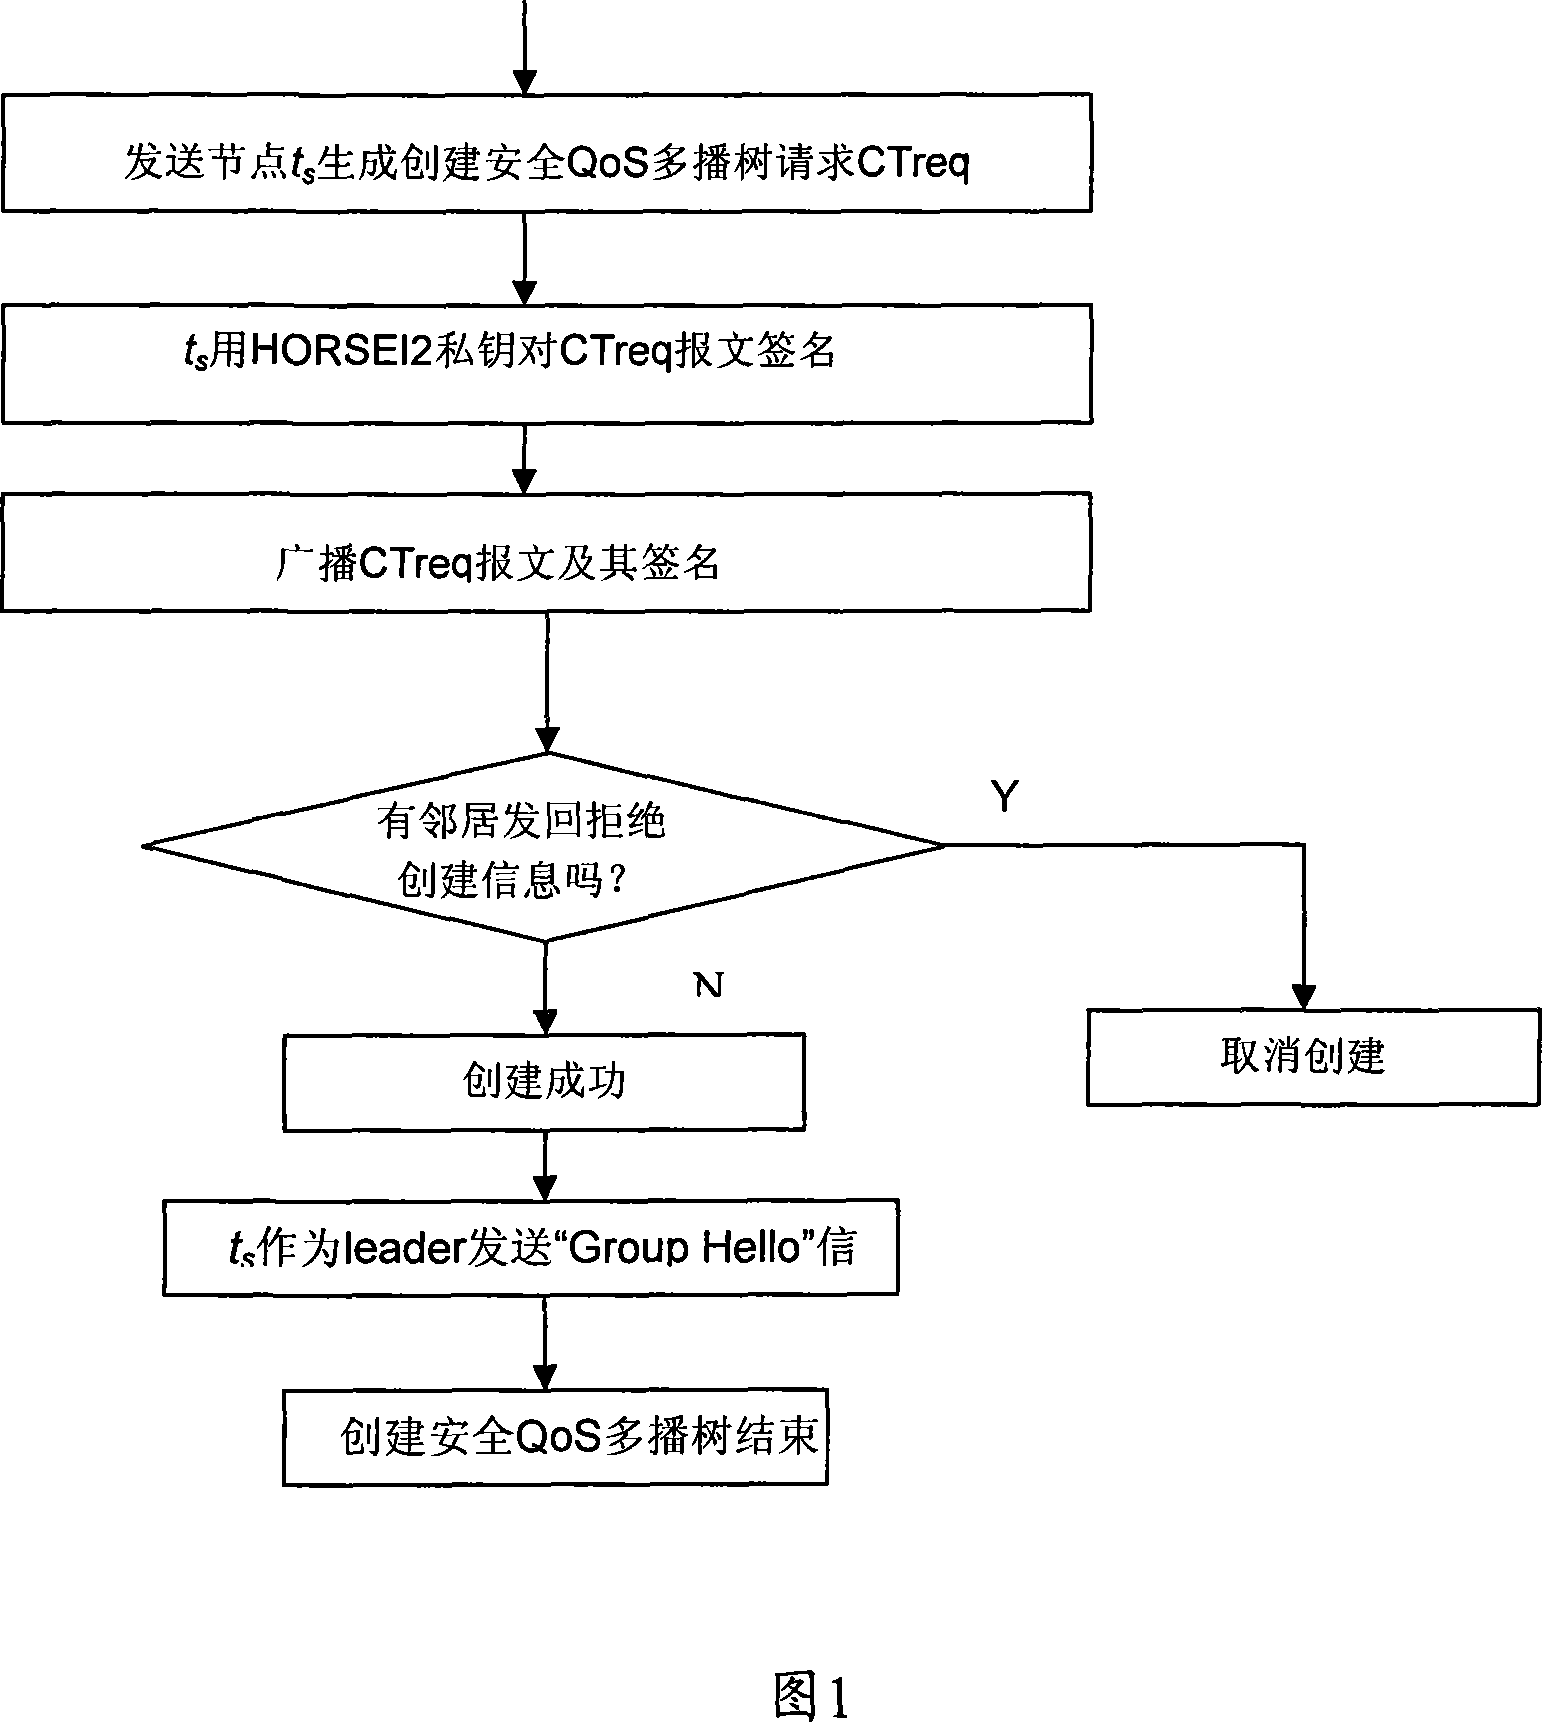 HORSEI2-based mobile self-organized network safety QoS multicast route creating method